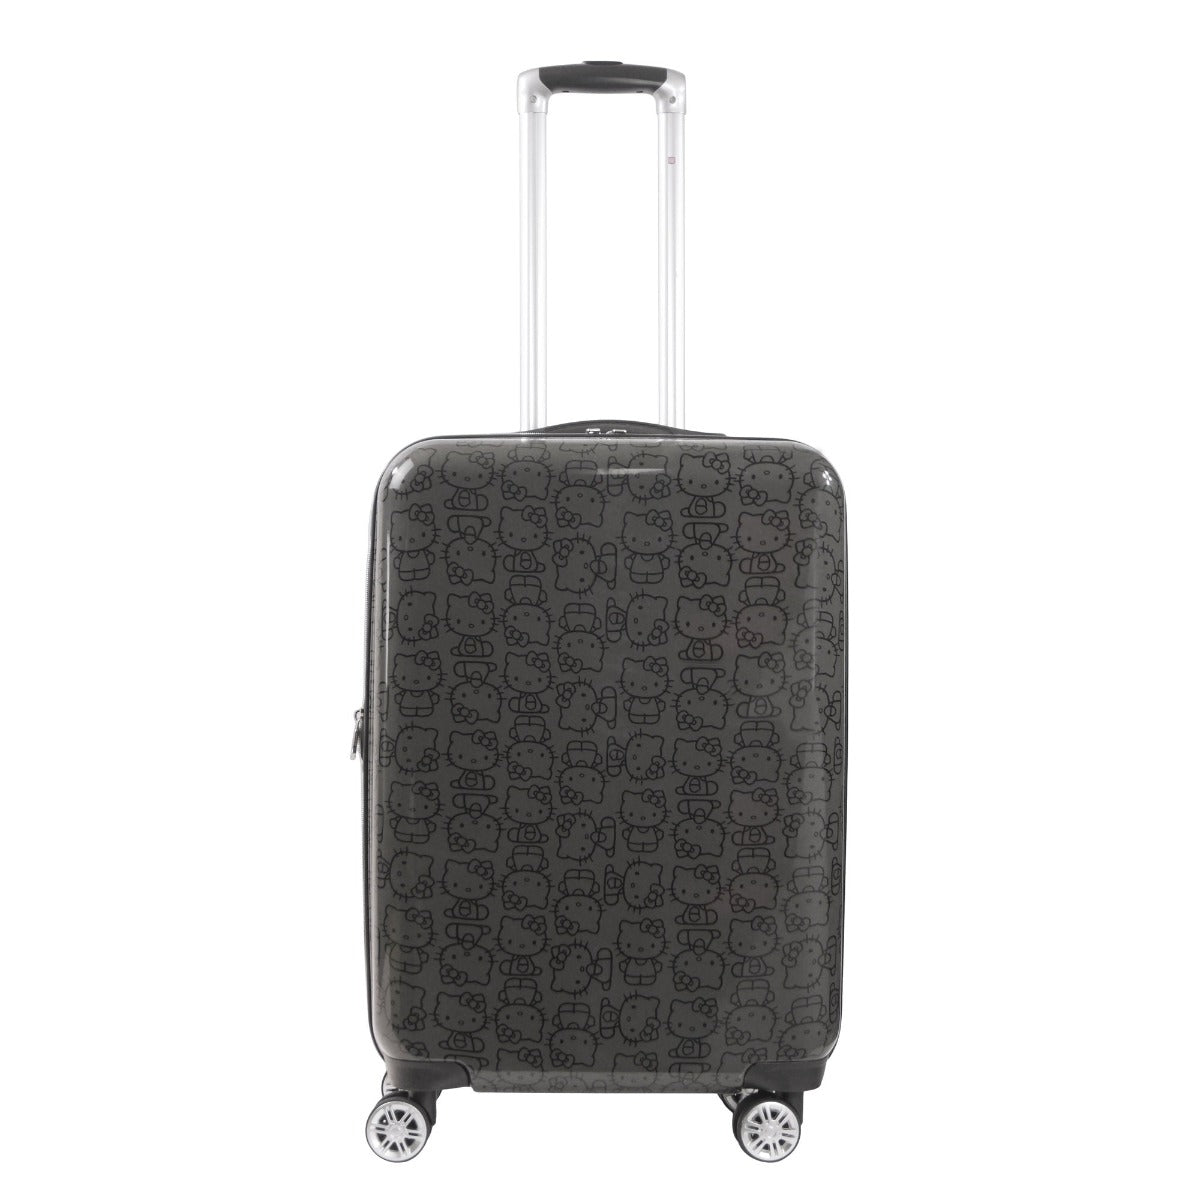 Hello Kitty Pose All Over Print 25.5 inch Hardsided Checked Luggage Black Spinner suitcase